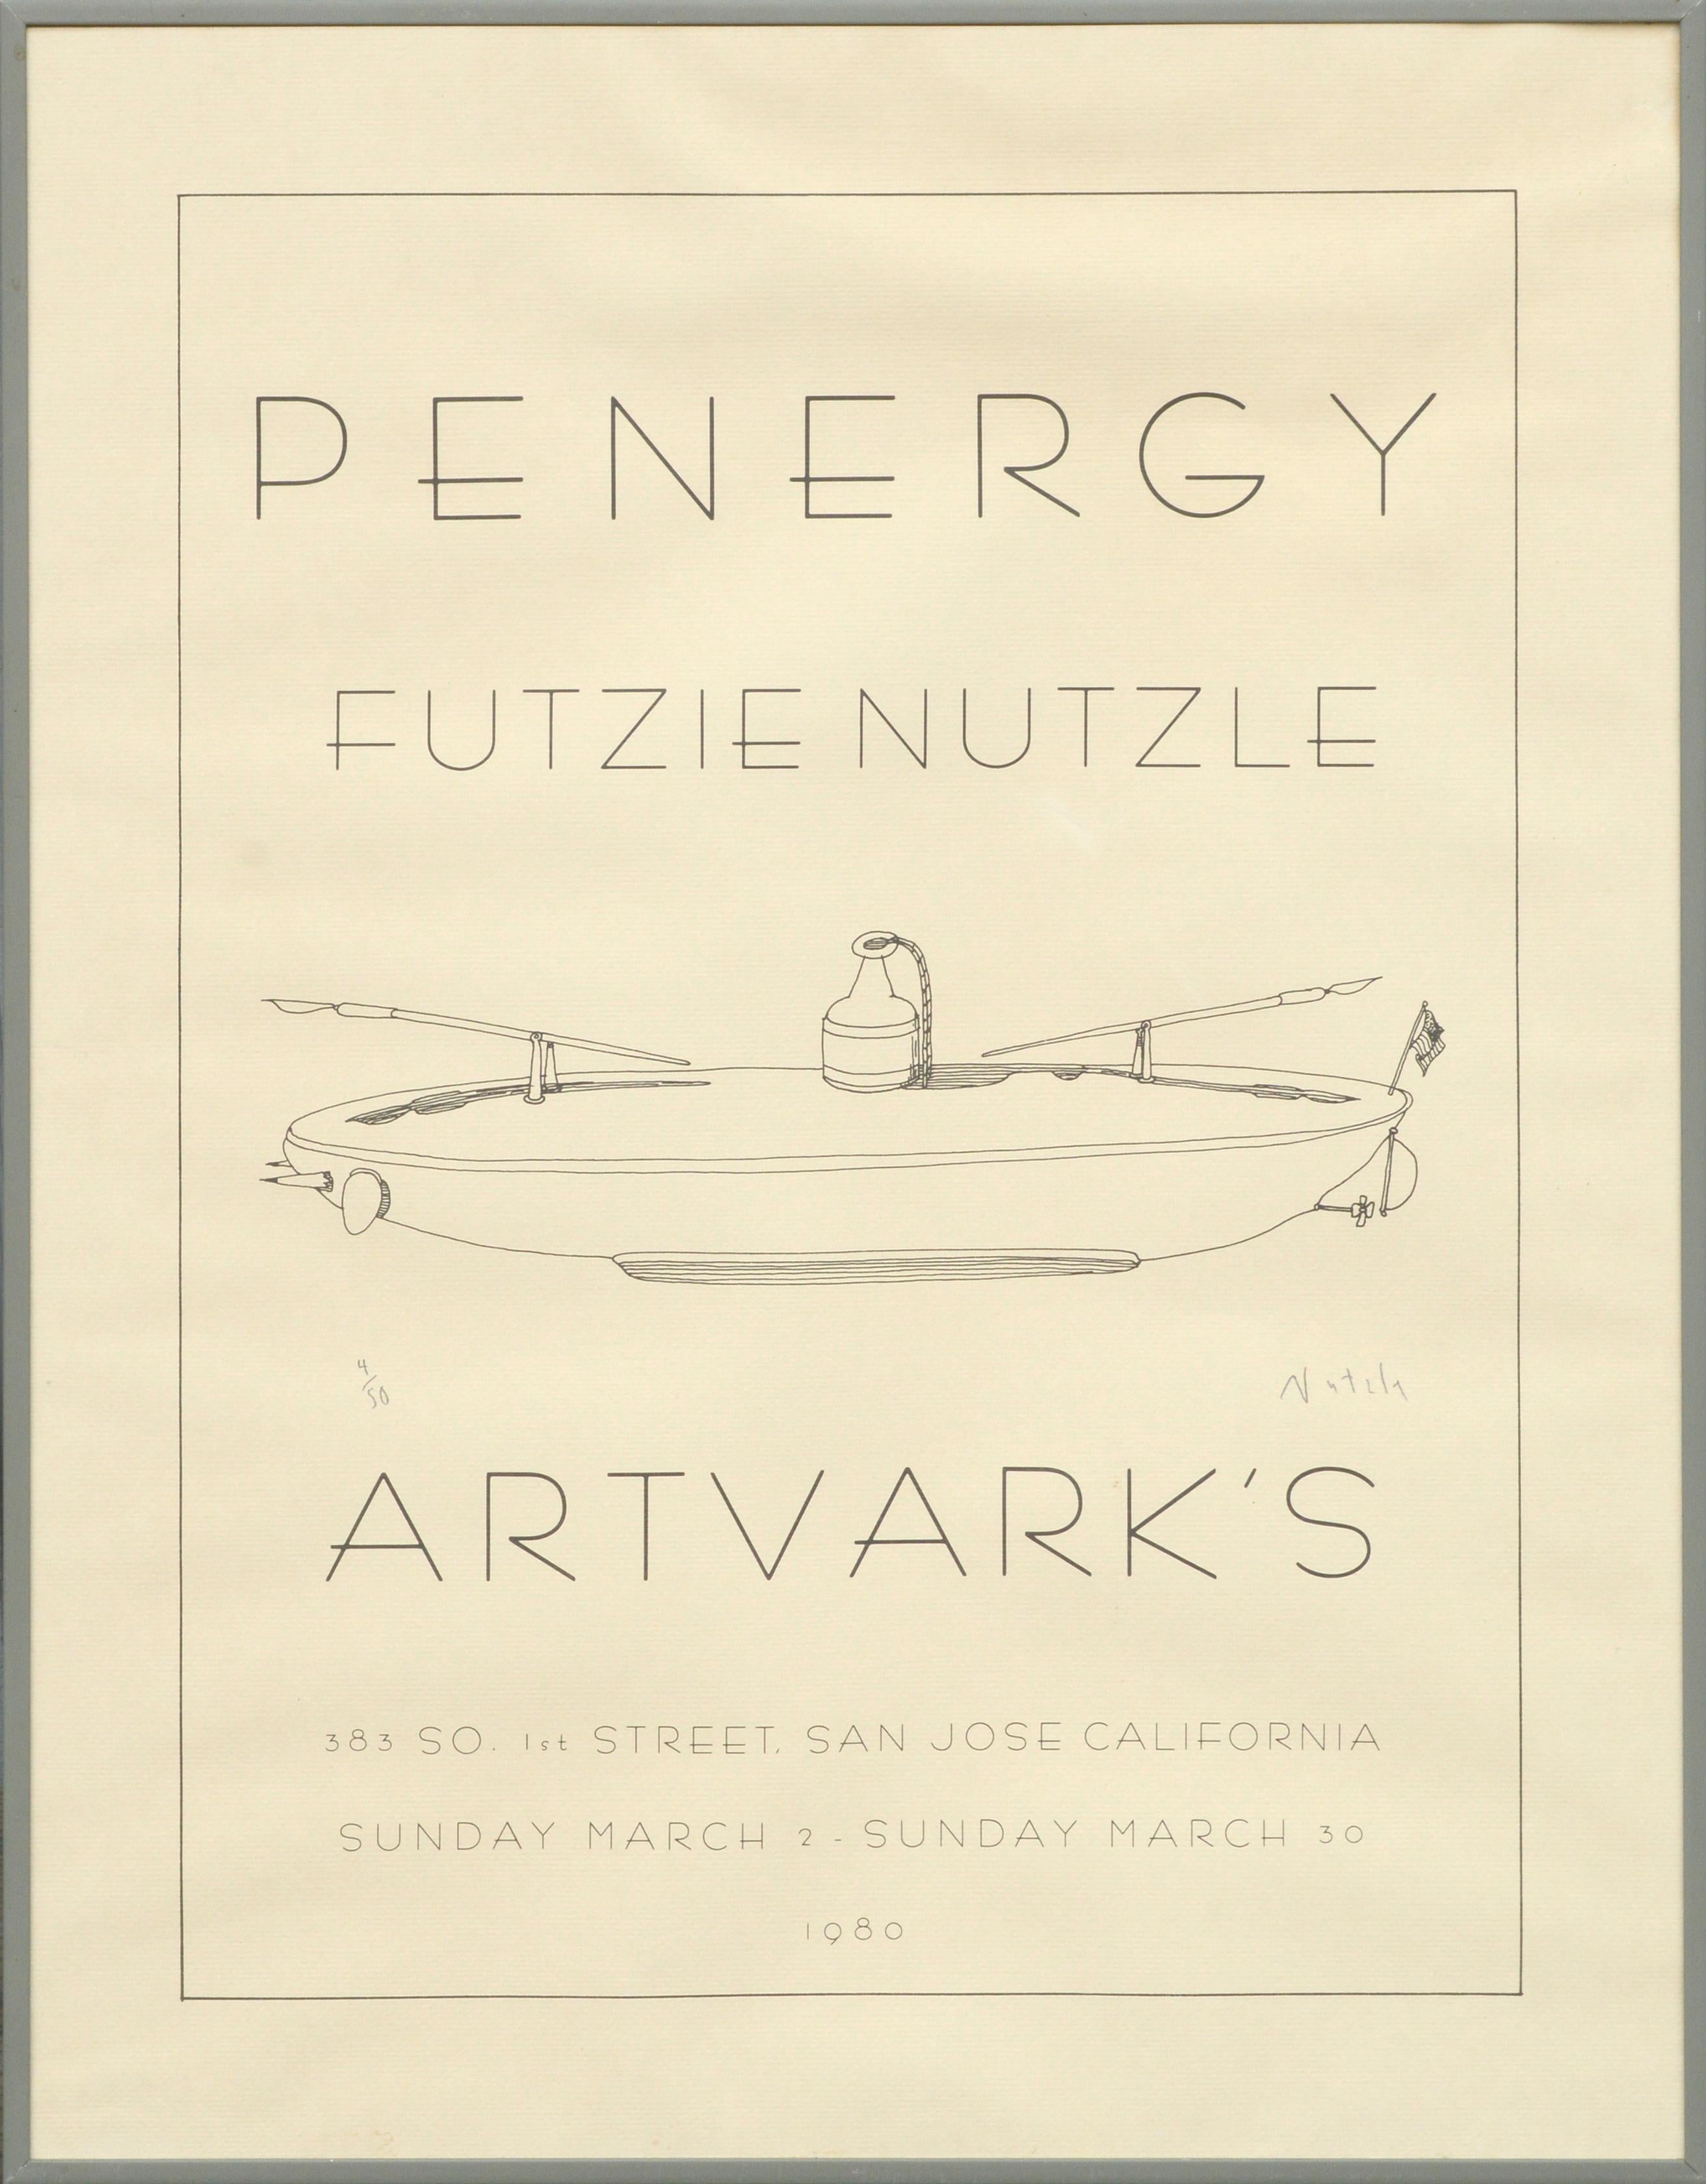 Futzie Nutzle Print - "Penergy" Signed and Numbered Show Poster